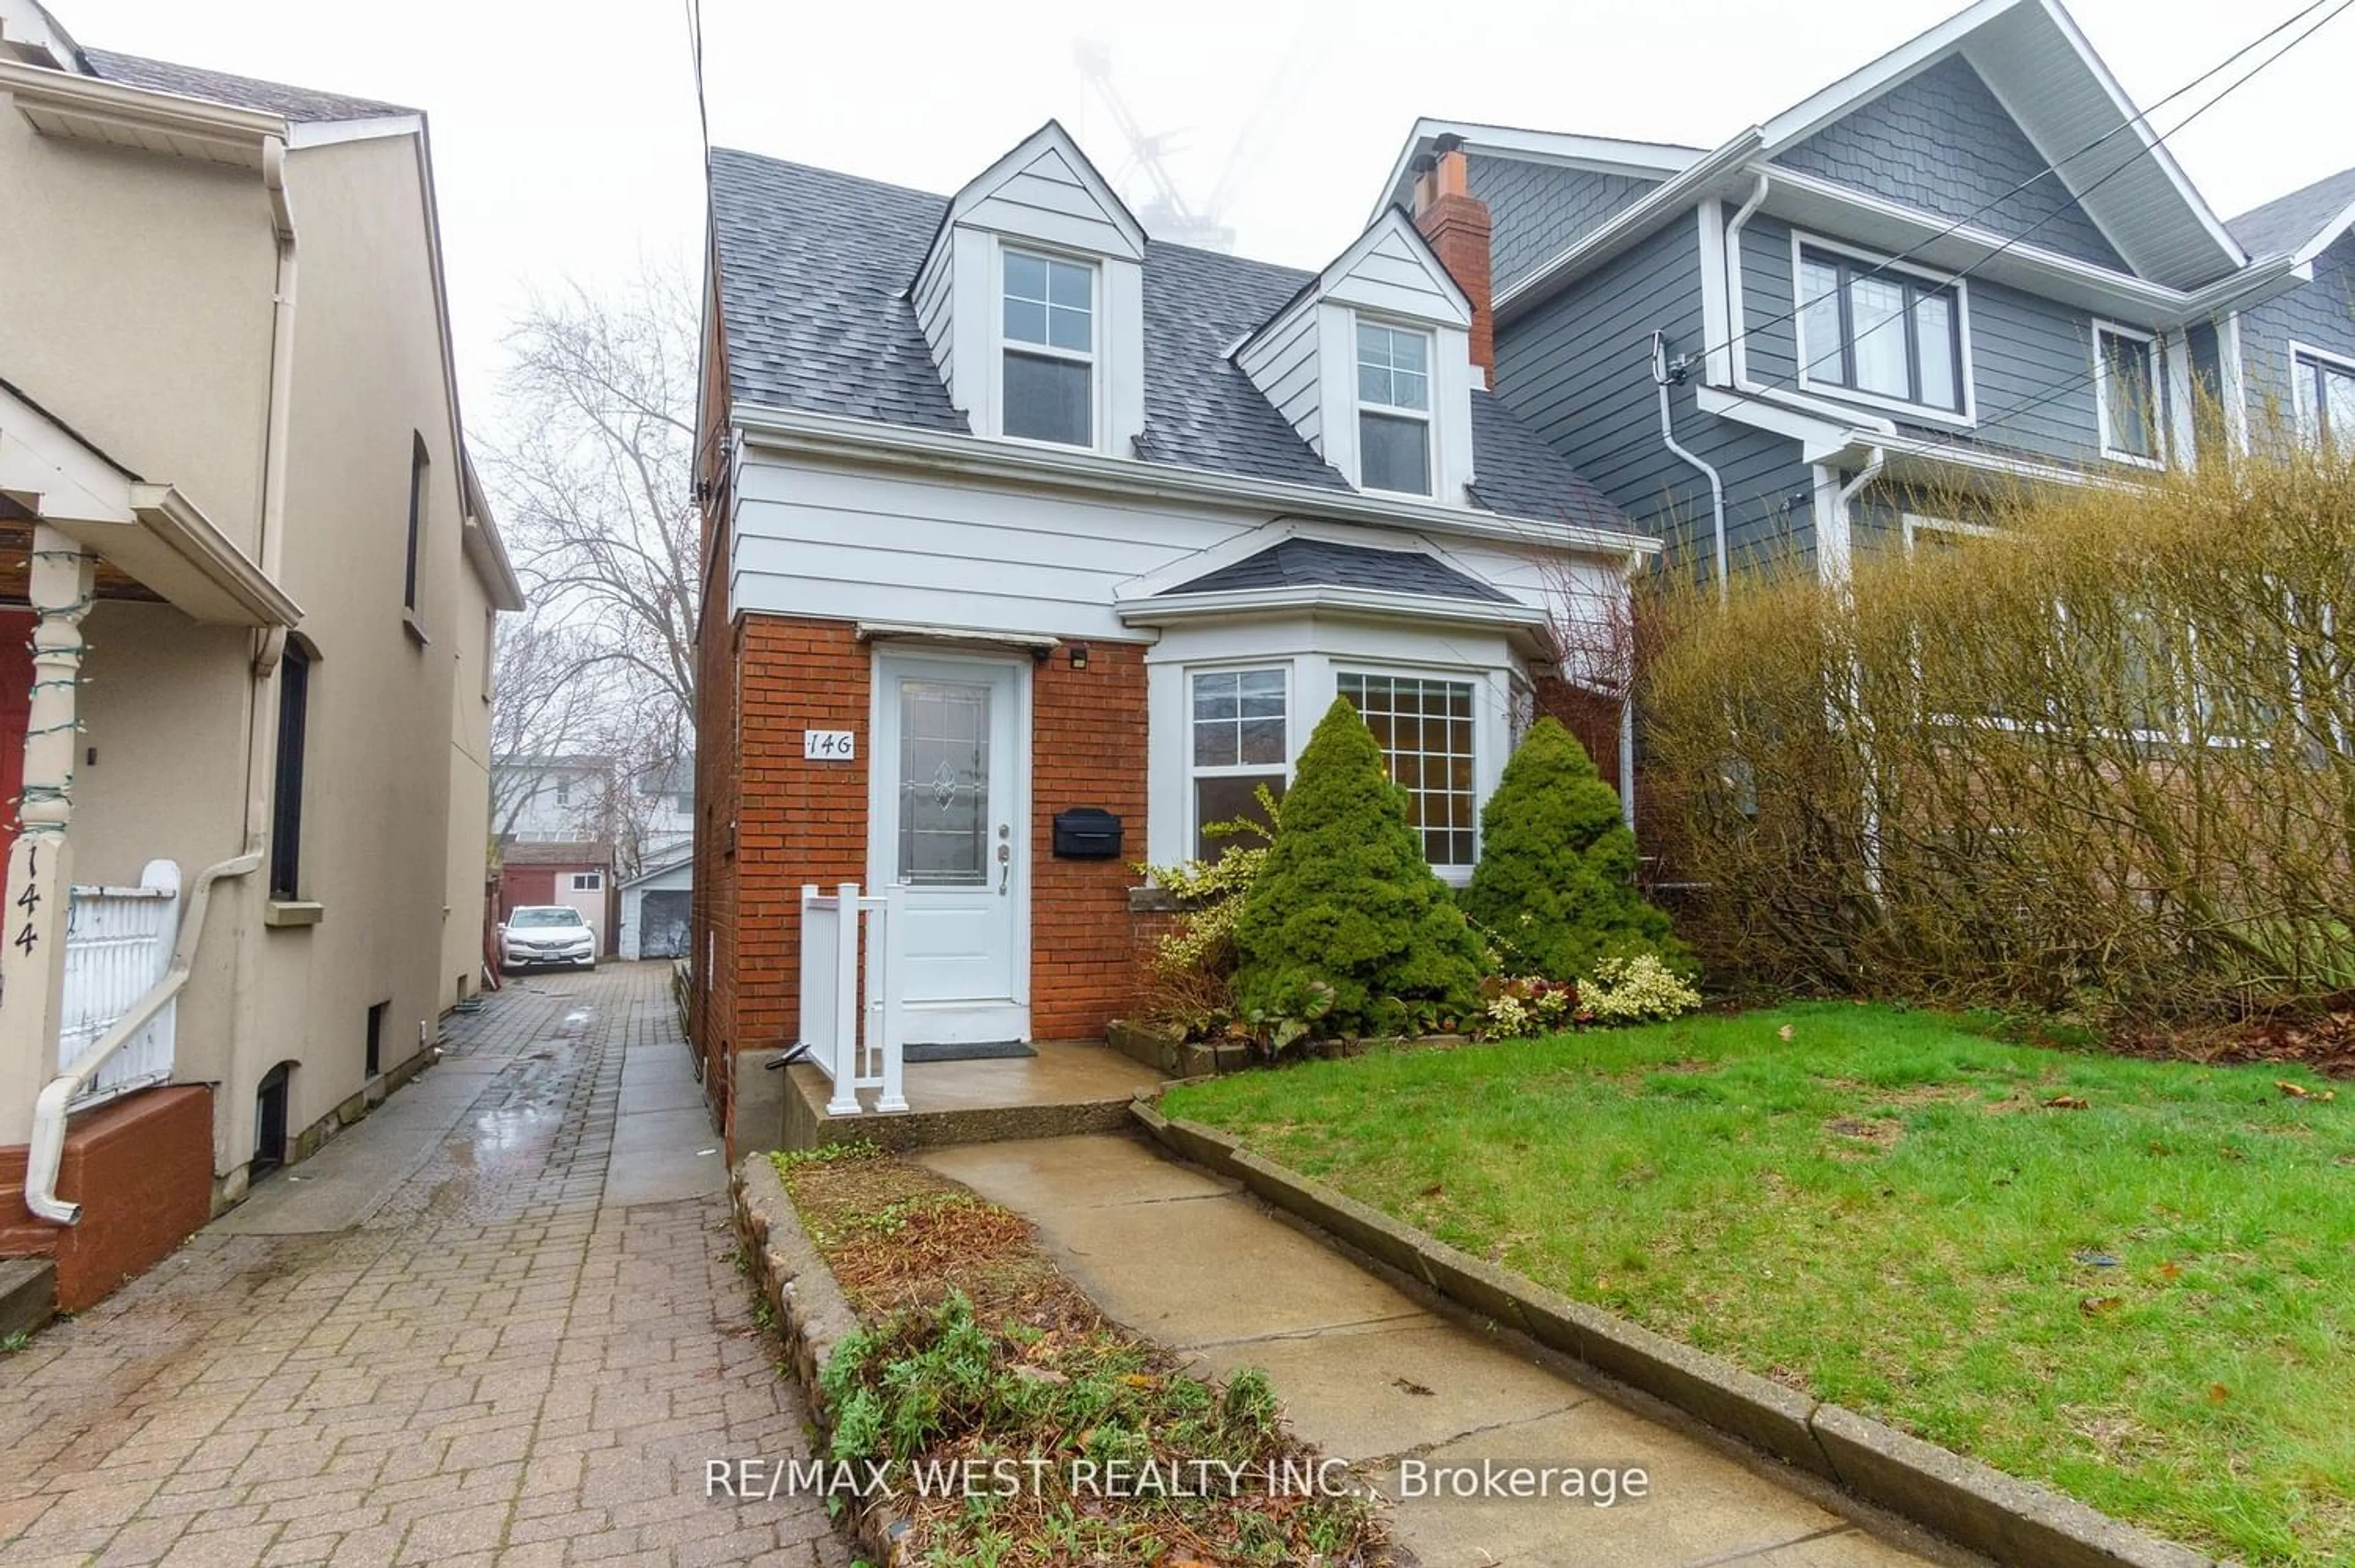 Frontside or backside of a home for 146 Fallingbrook Rd, Toronto Ontario M1N 2T6